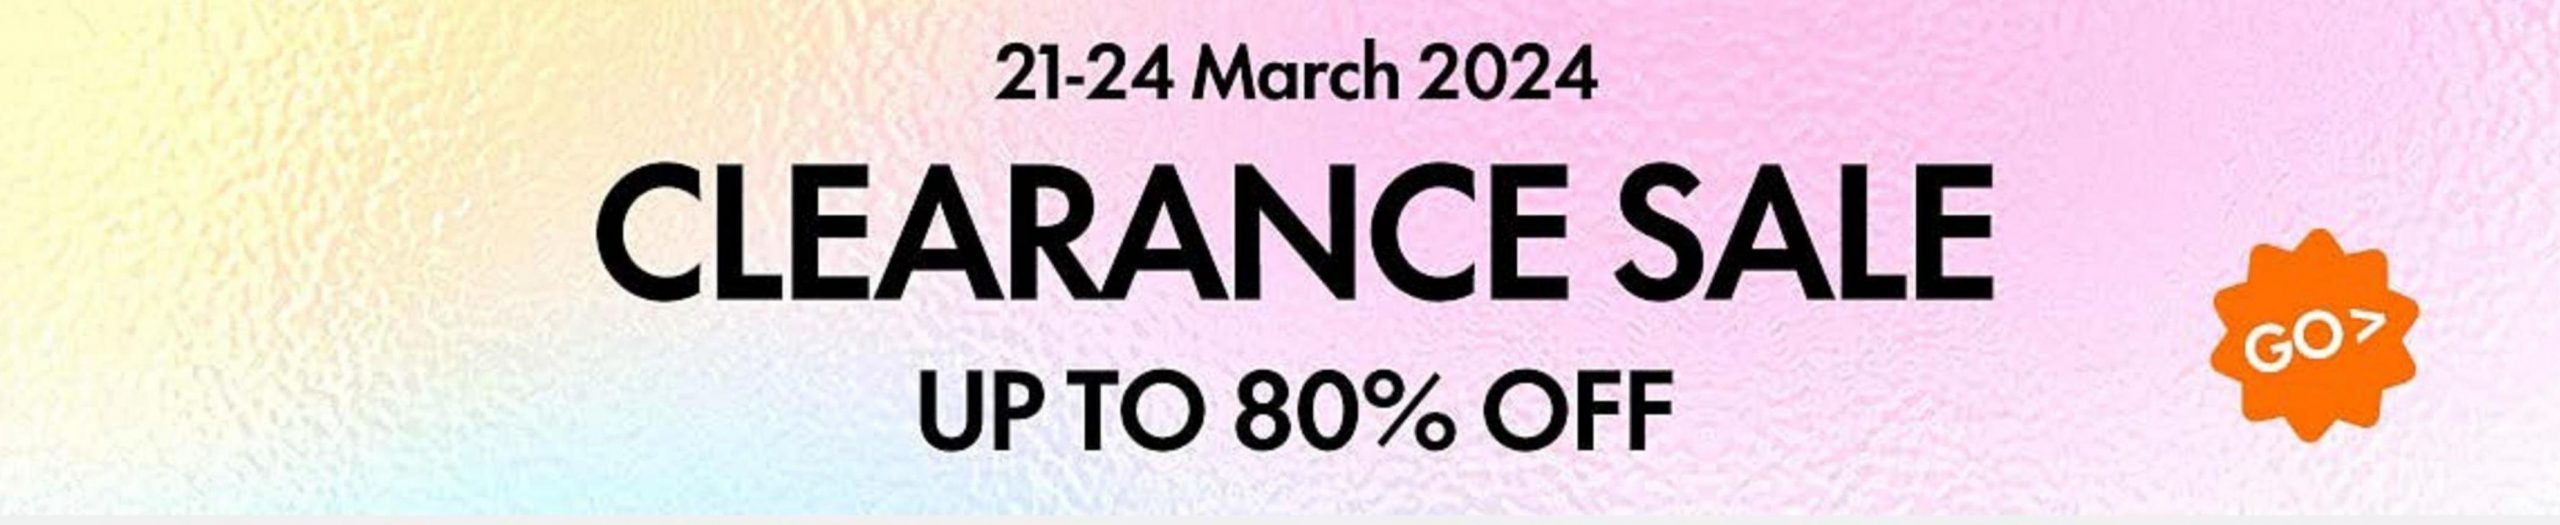 Clearance Sale Up to 80% Off. LightInTheBox (2024-03-24-2024-03-24)